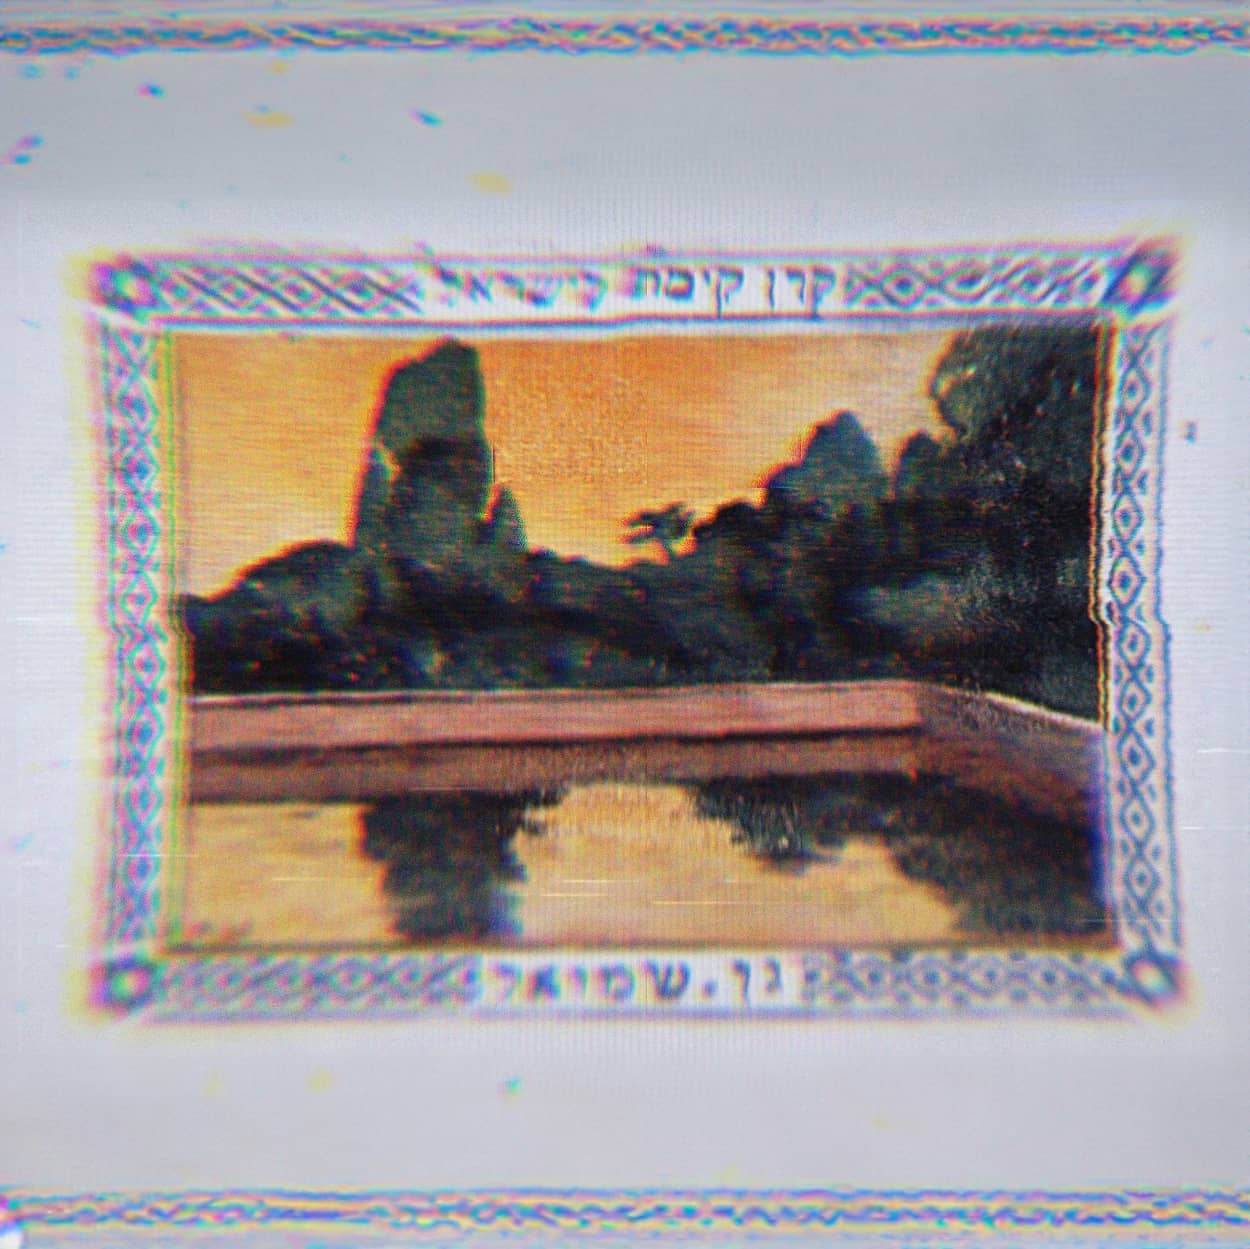 Jewish National Fund stamp from 1915 with a drawing of the old blessing in Gan Shmuel.